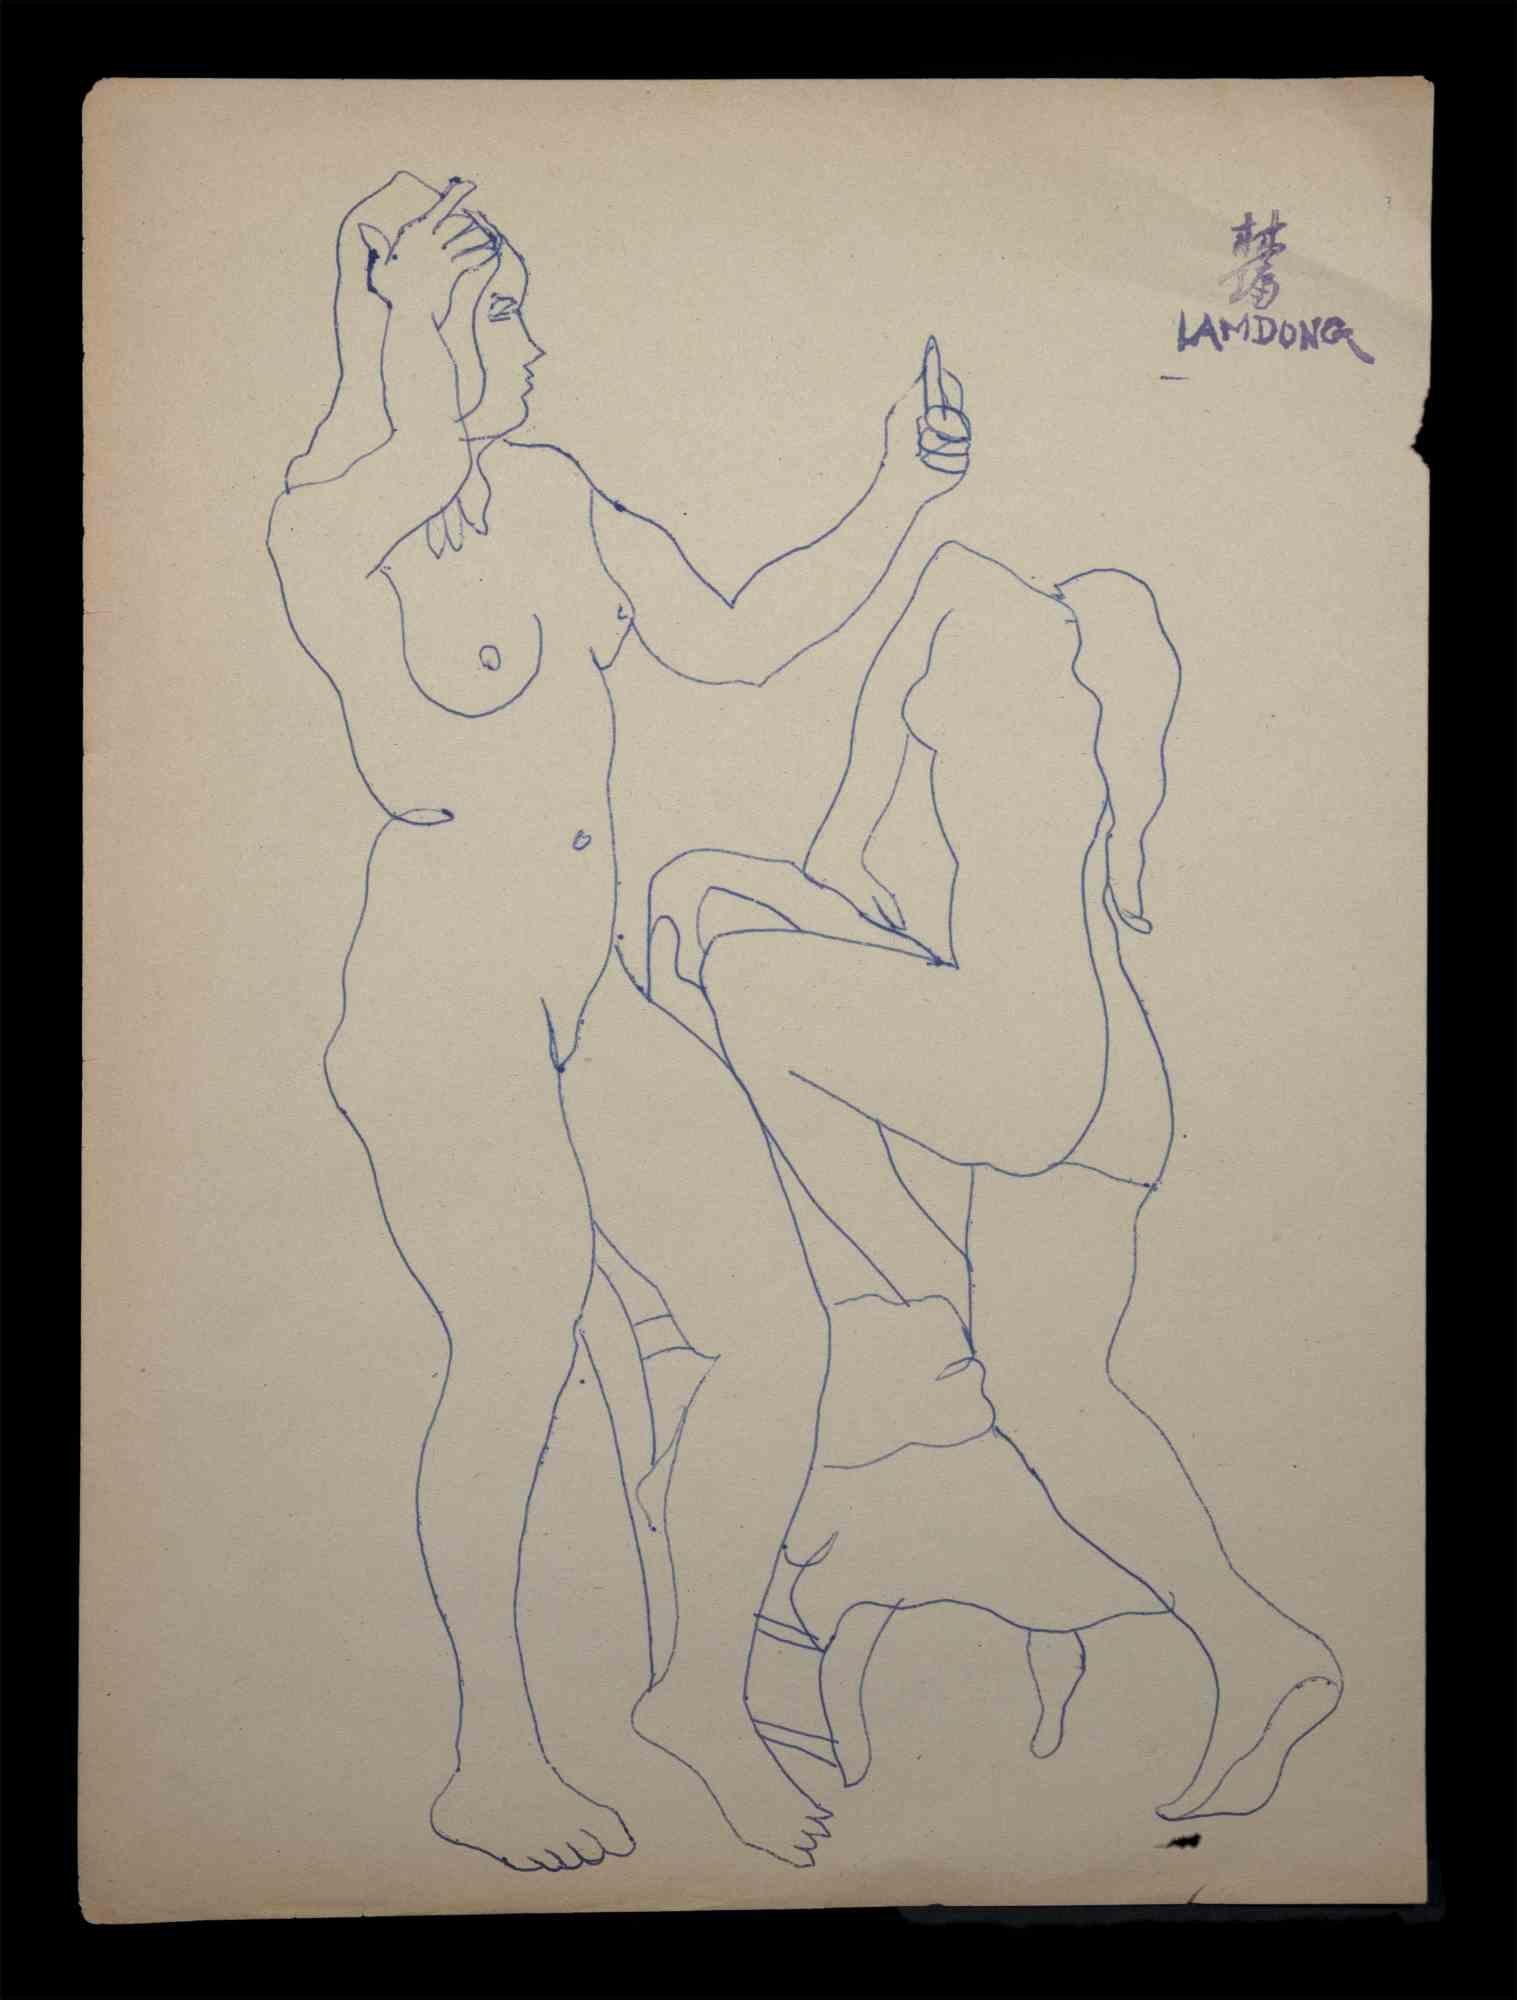 Nude is an original drawing in Pen realized by Lam Dong (1920-1987) in the mid-20th Century.

Good conditions. Stamp signature.

The artwork is depicted through strong strokes in a well-balanced composition.